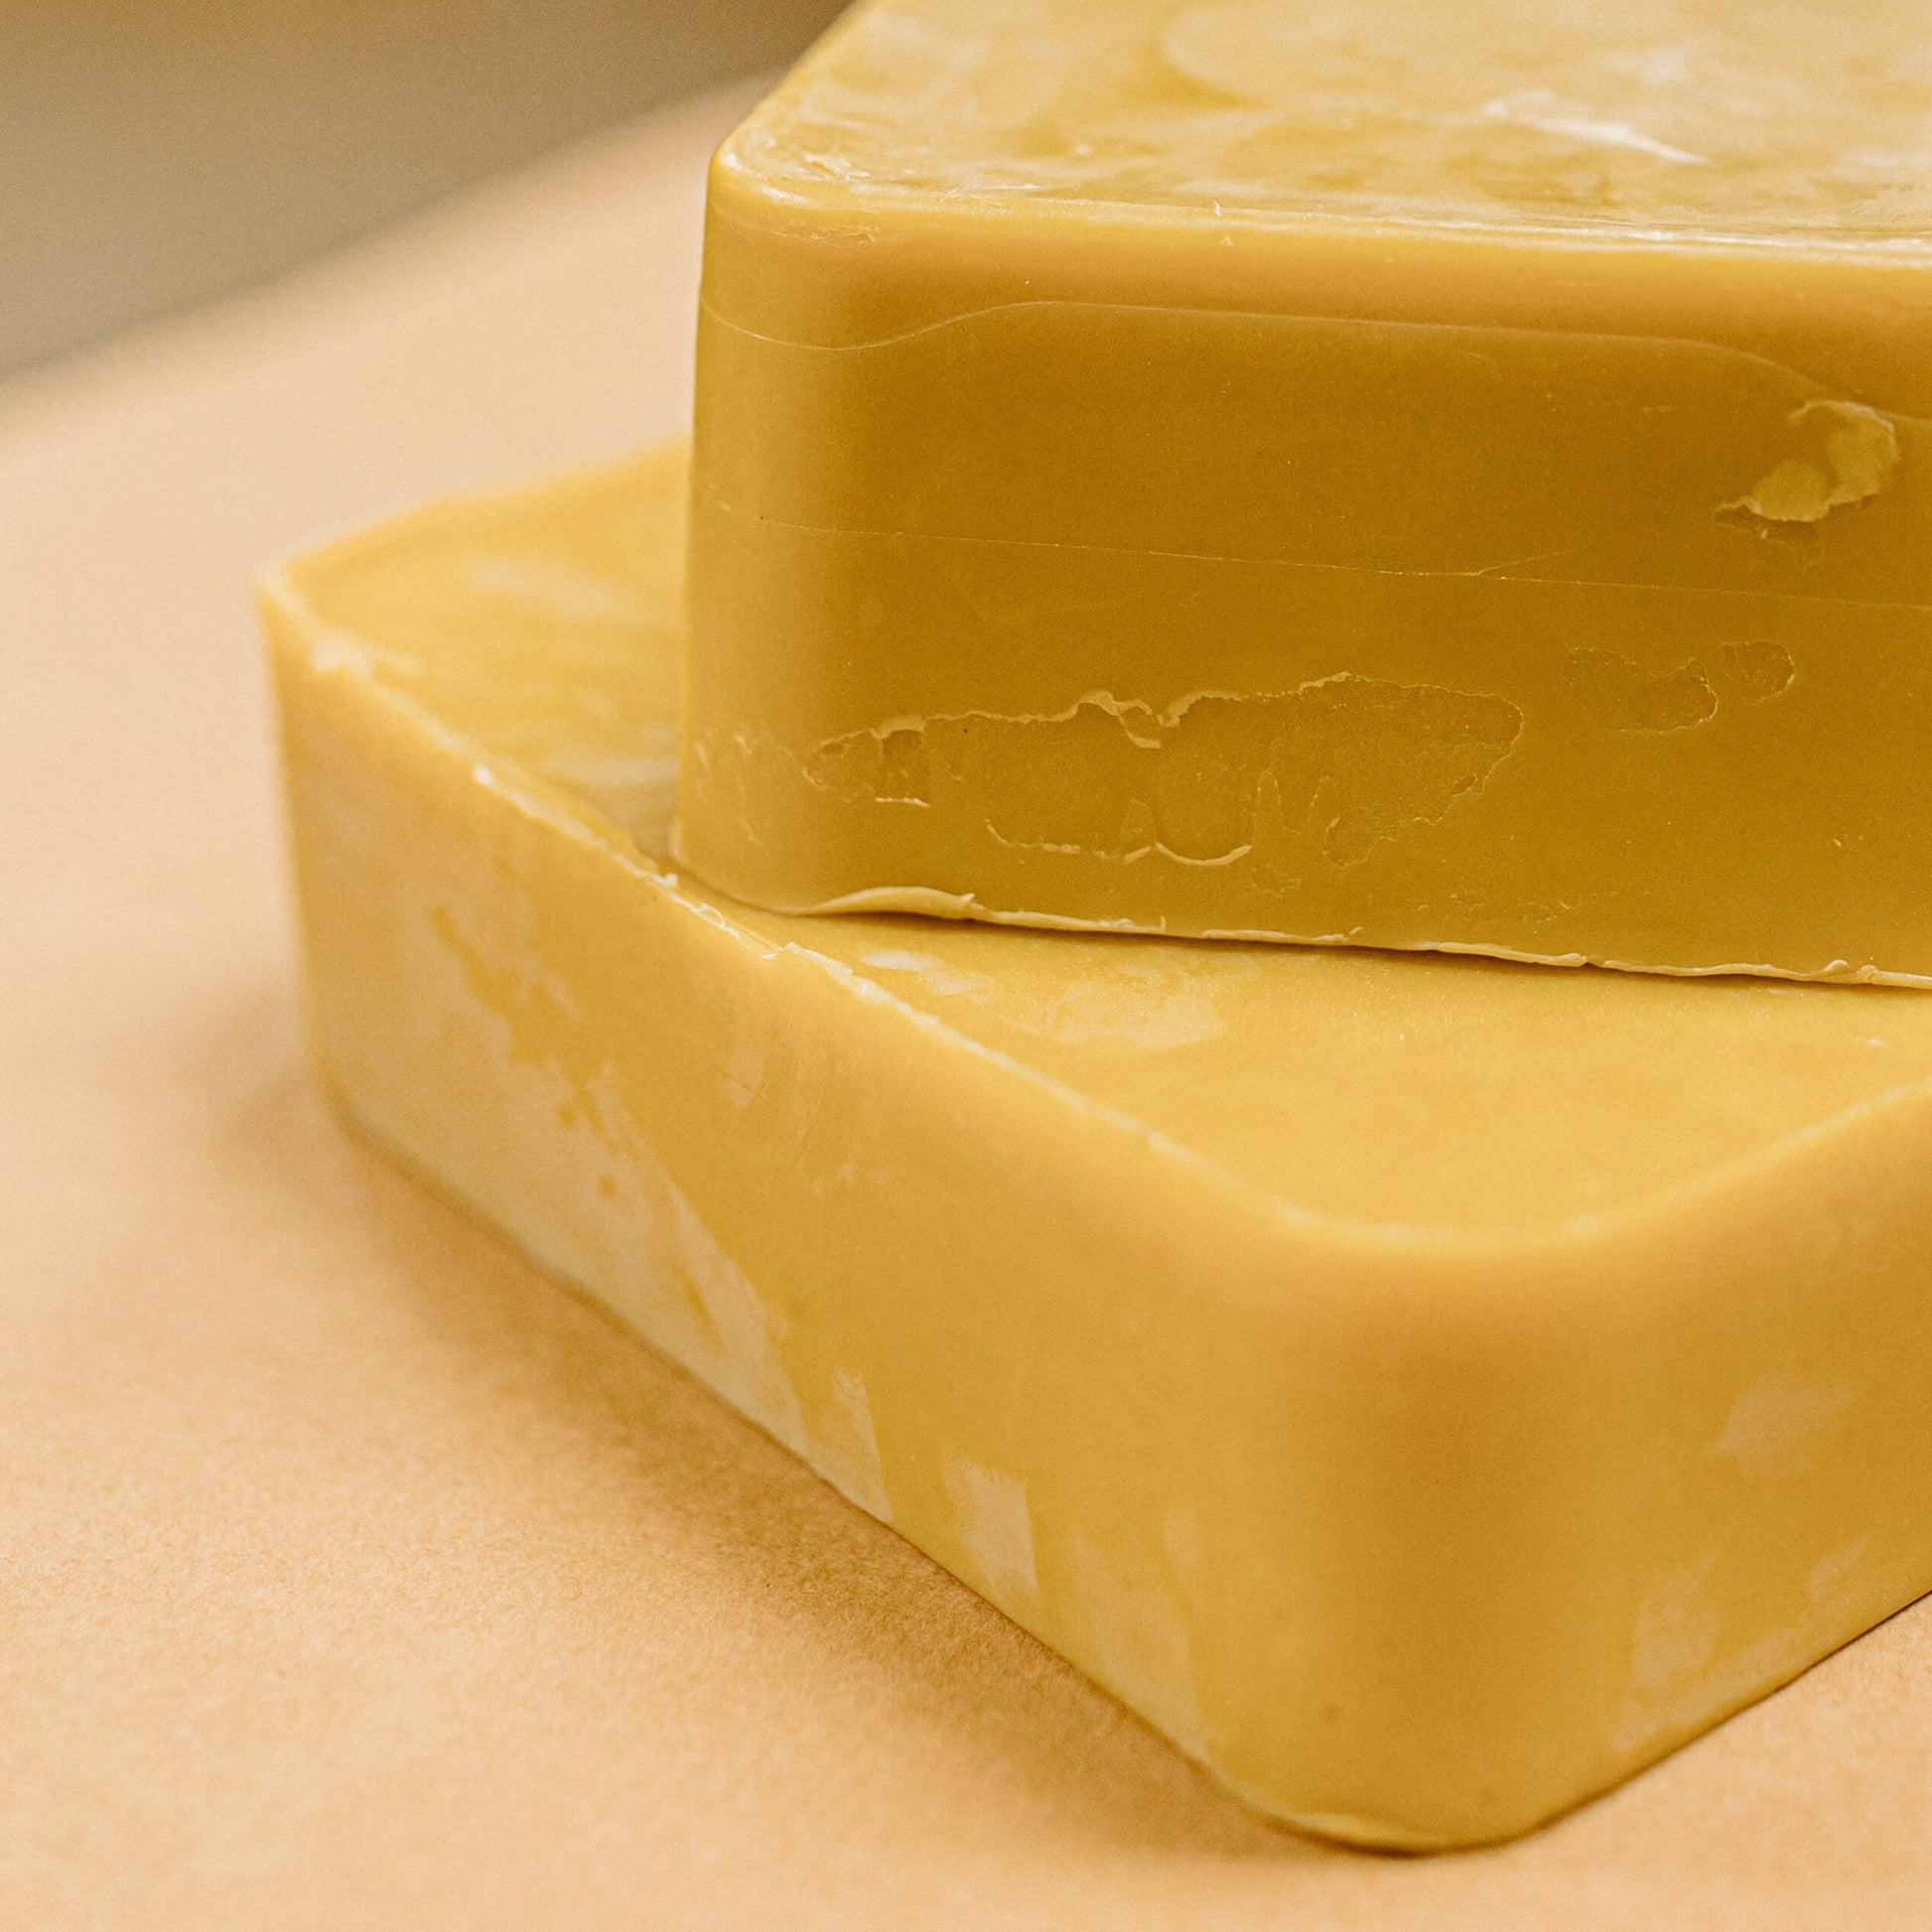 Wholesale refined yellow beeswax sale For Rejuvenating Your Body